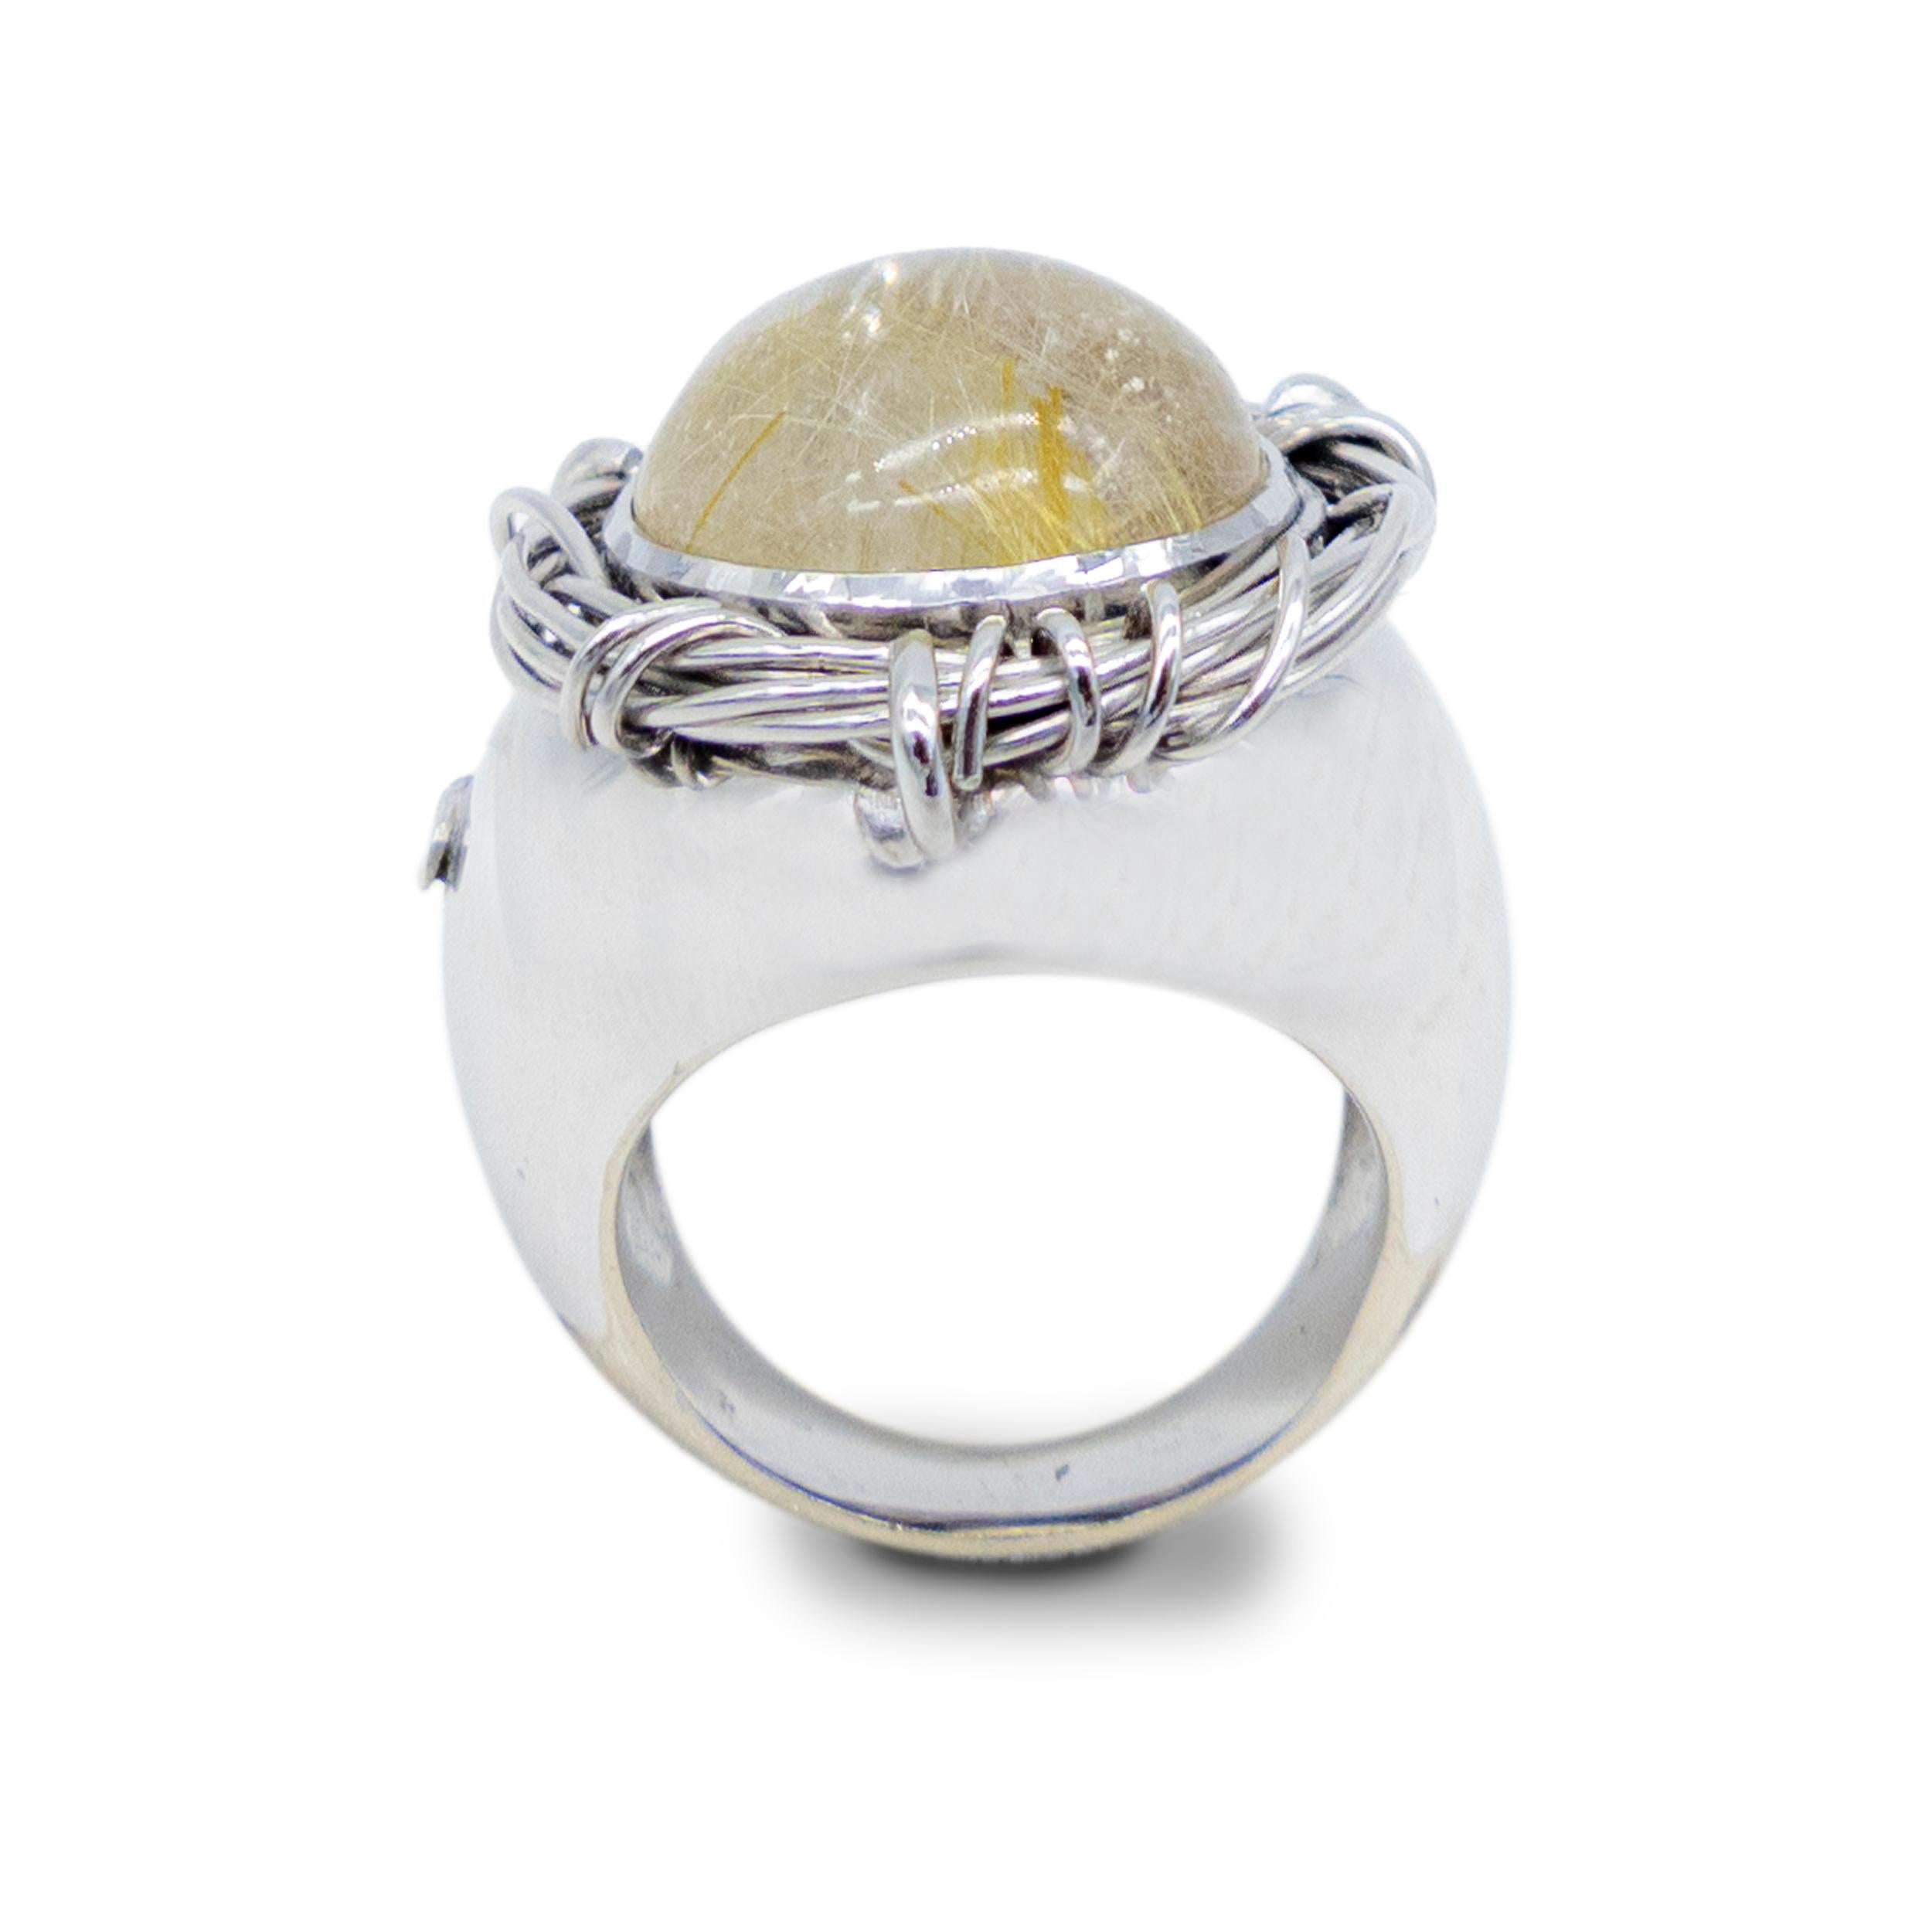 21st Century White Gold Cocktail Ring Nest Rutilated Quartz

White gold ring with nest shape and rutilated quartz.

This stunning 21st Century White Gold Cocktail Ring Nest Rutilated Quartz is the perfect piece to add a touch of luxury and